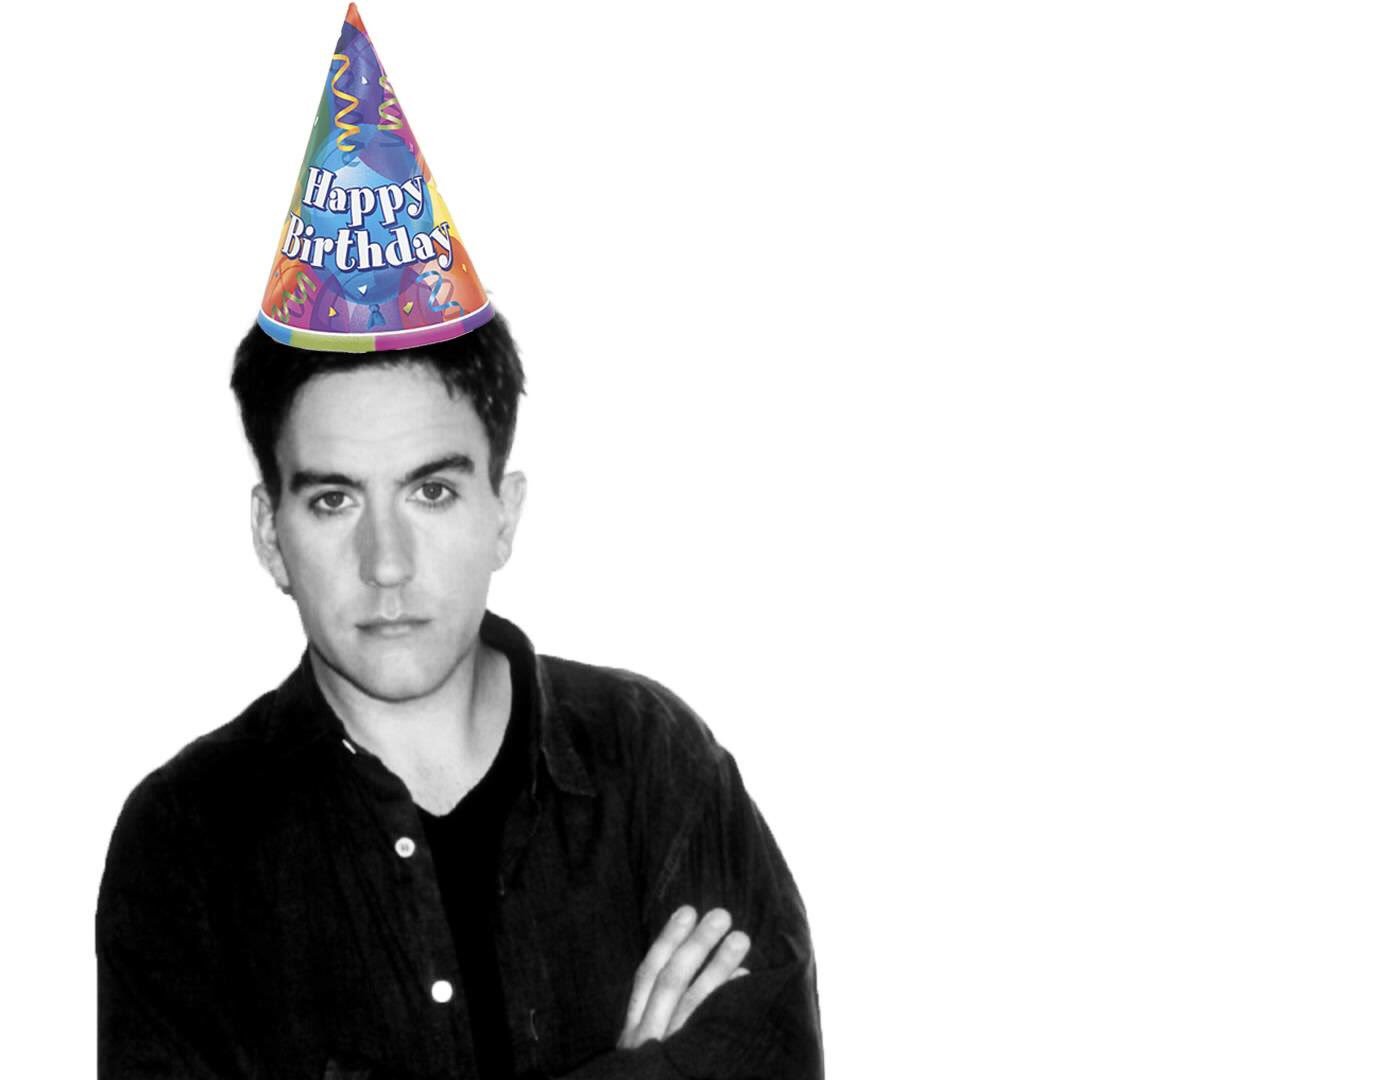 Happy birthday to Terry, from all at Terry Hall Fanpage 